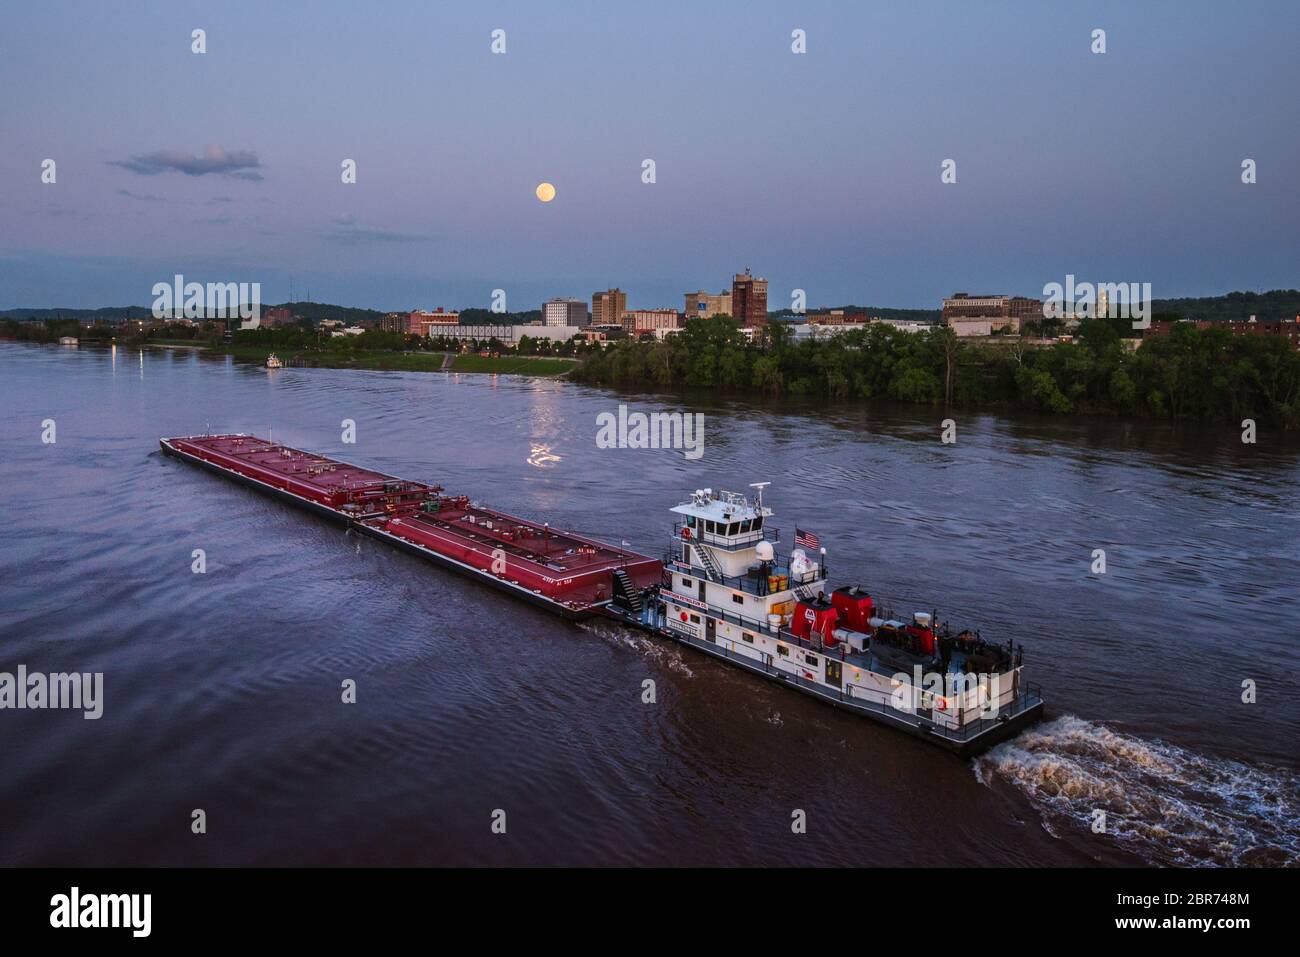 The moon rises above the river front park in Huntington, West Virginia with a large boat passing through the Ohio River. Stock Photo